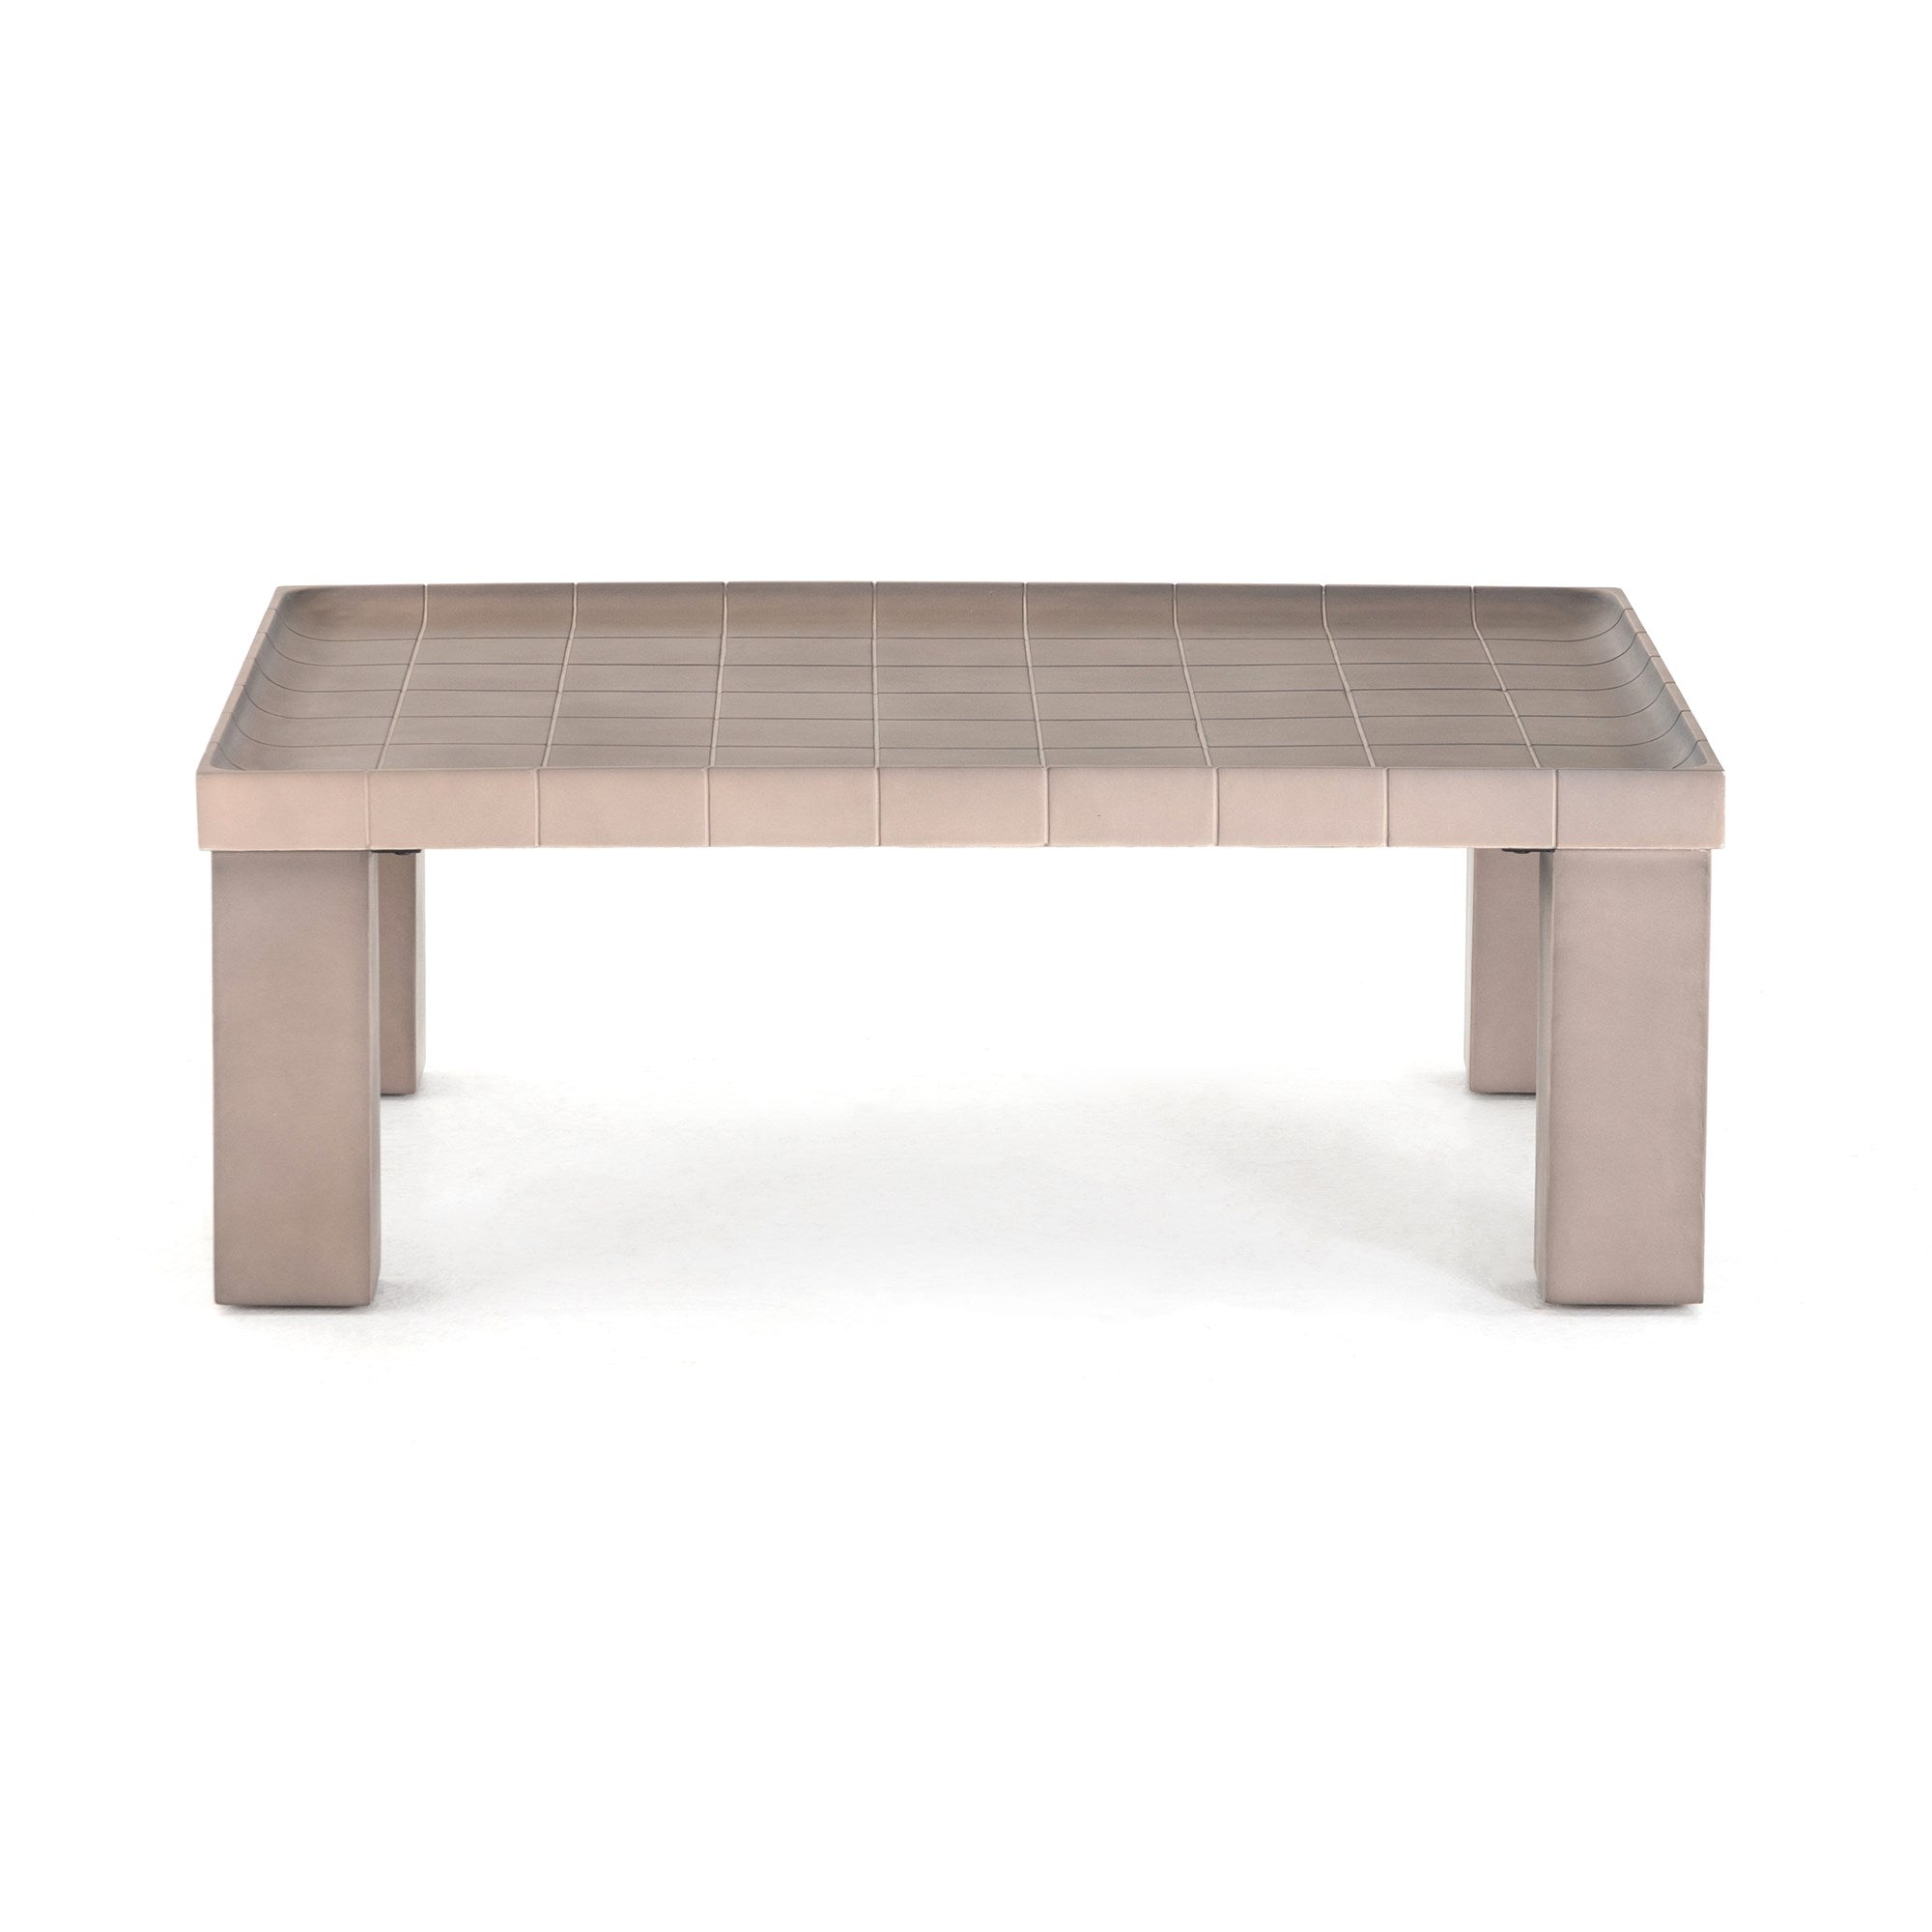 Rigby Outdoor Coffee Table